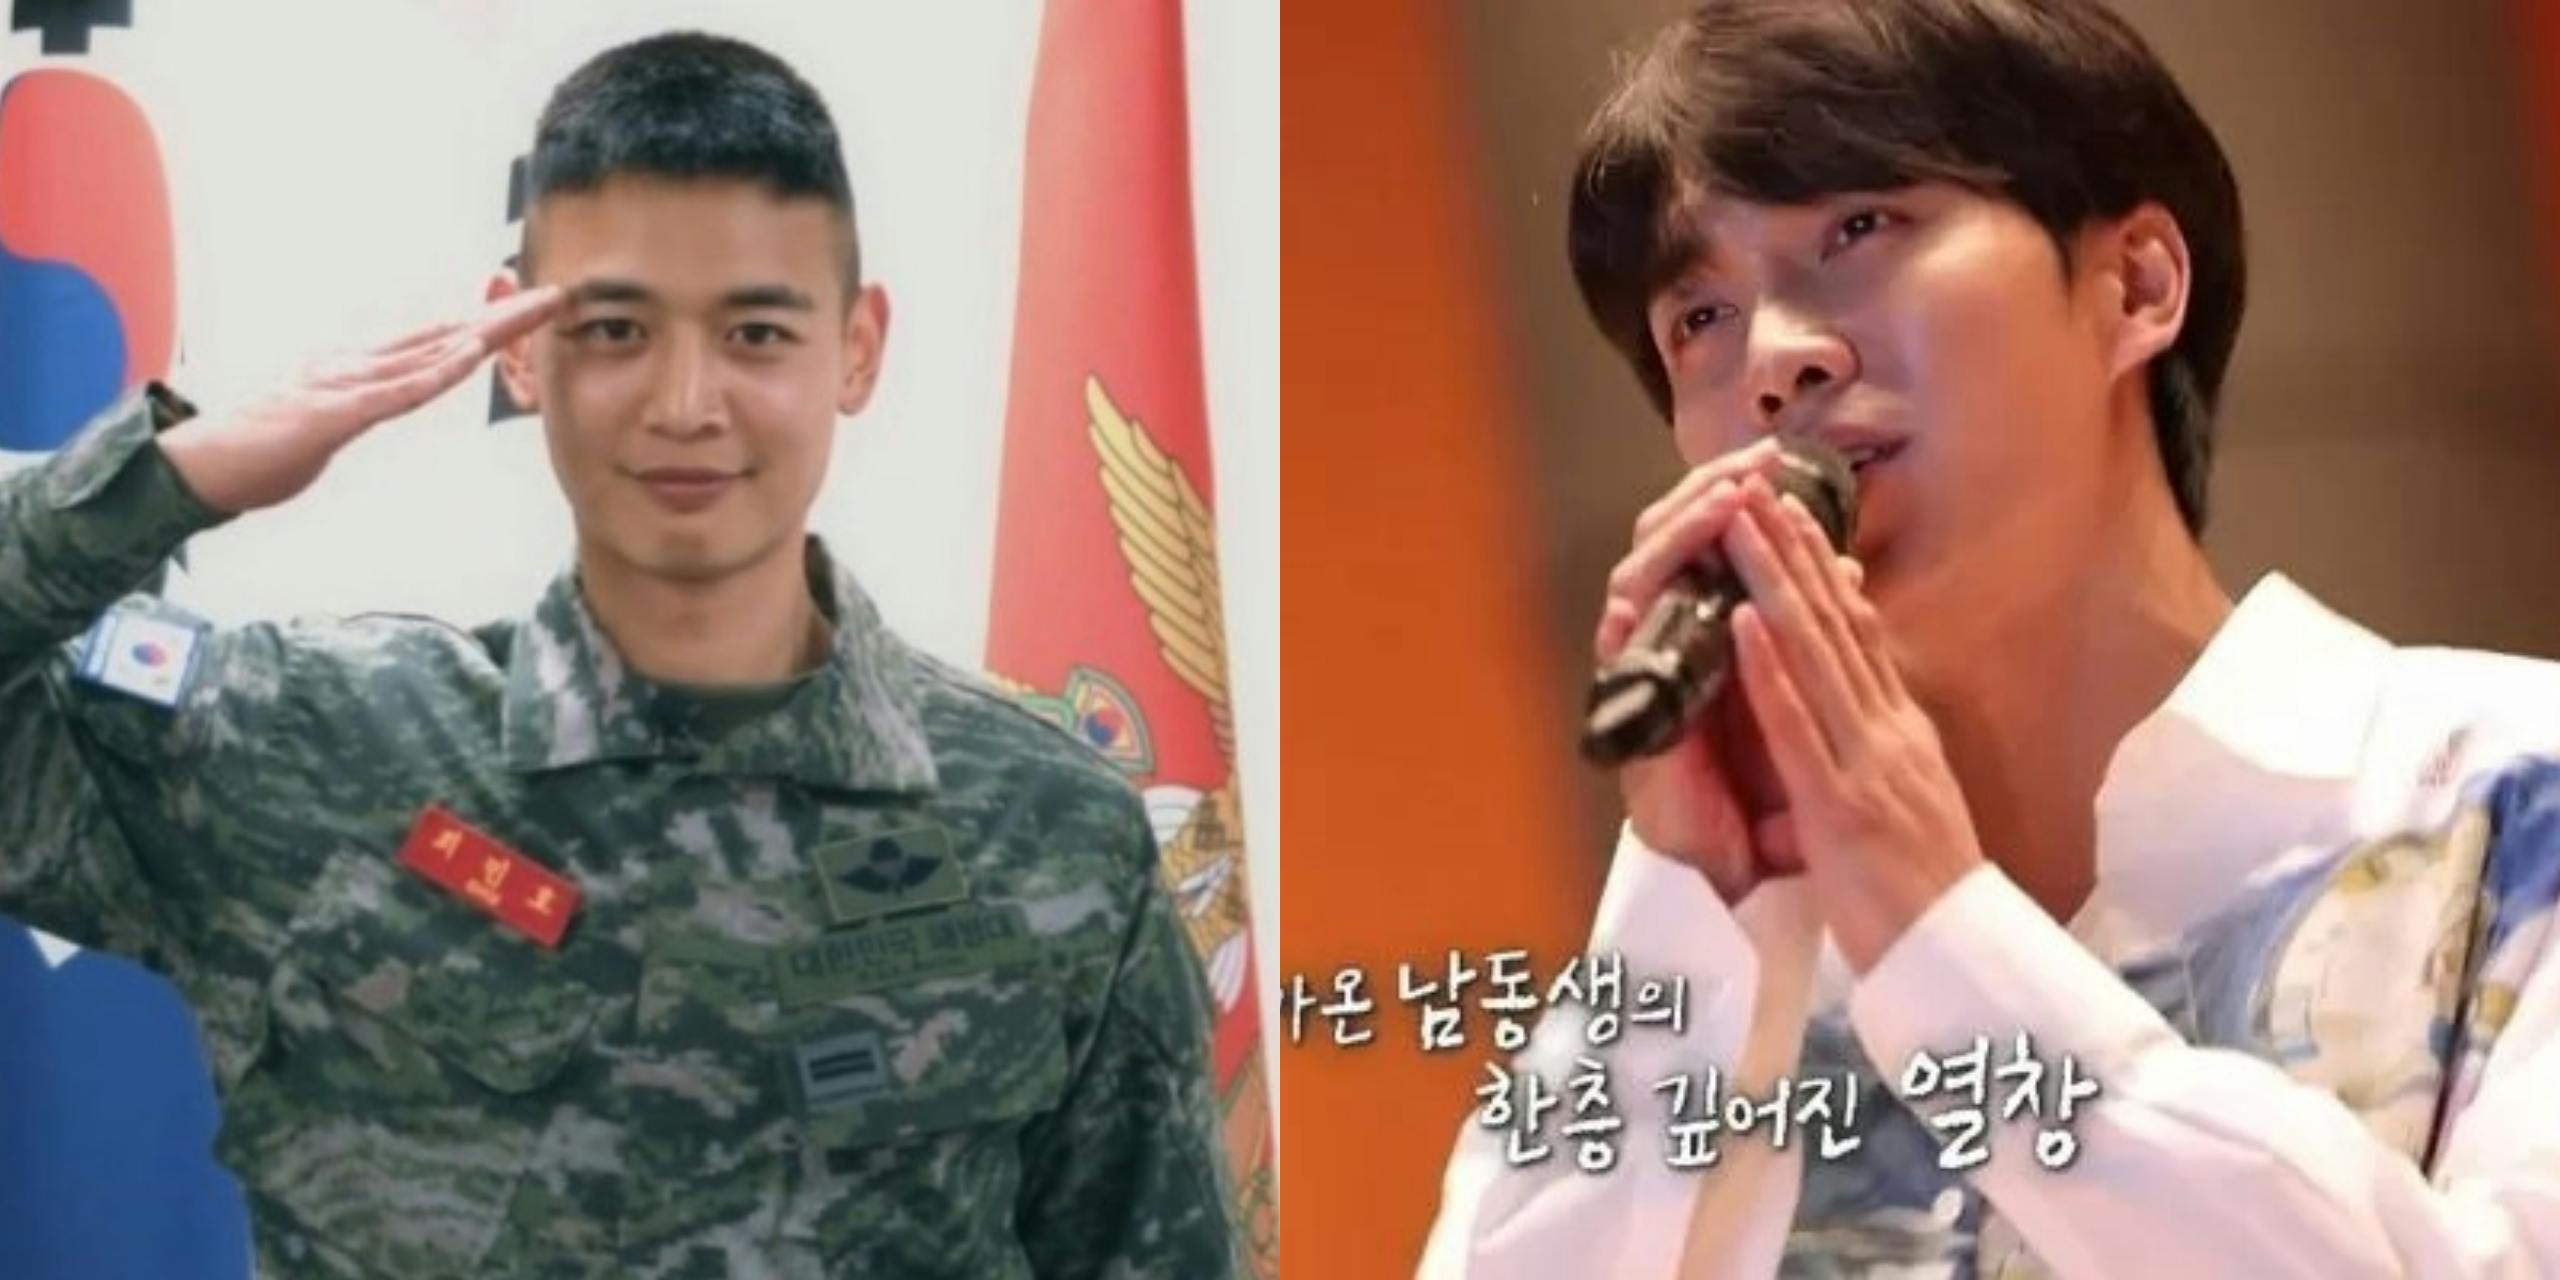 Latest Lee Seung Gi Releases A New Single Shinee S Minho Discharged From Military And More